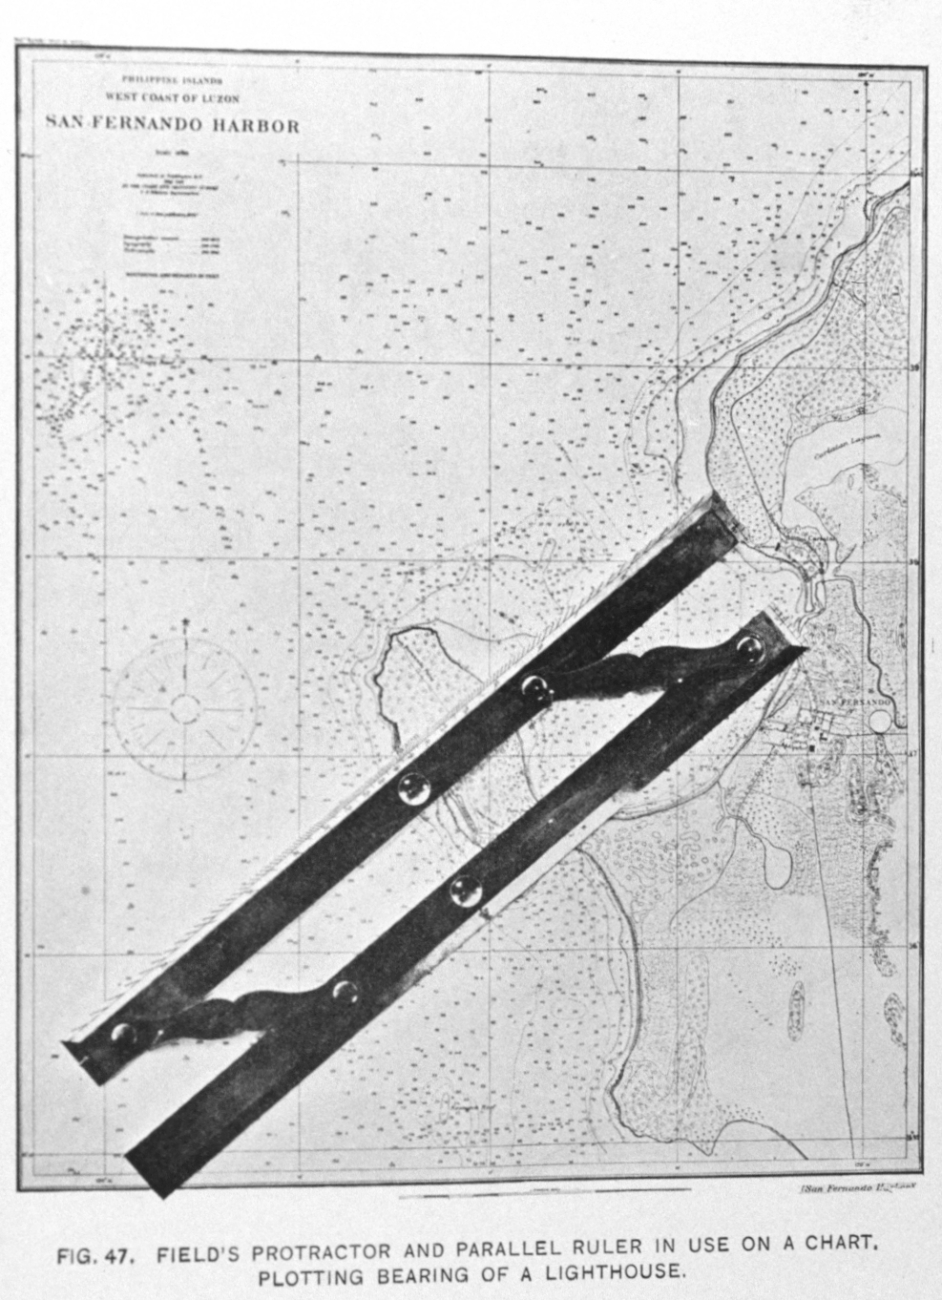 Field's protractor and parallel ruler in use on a chart, plotting bearing of alighthouse